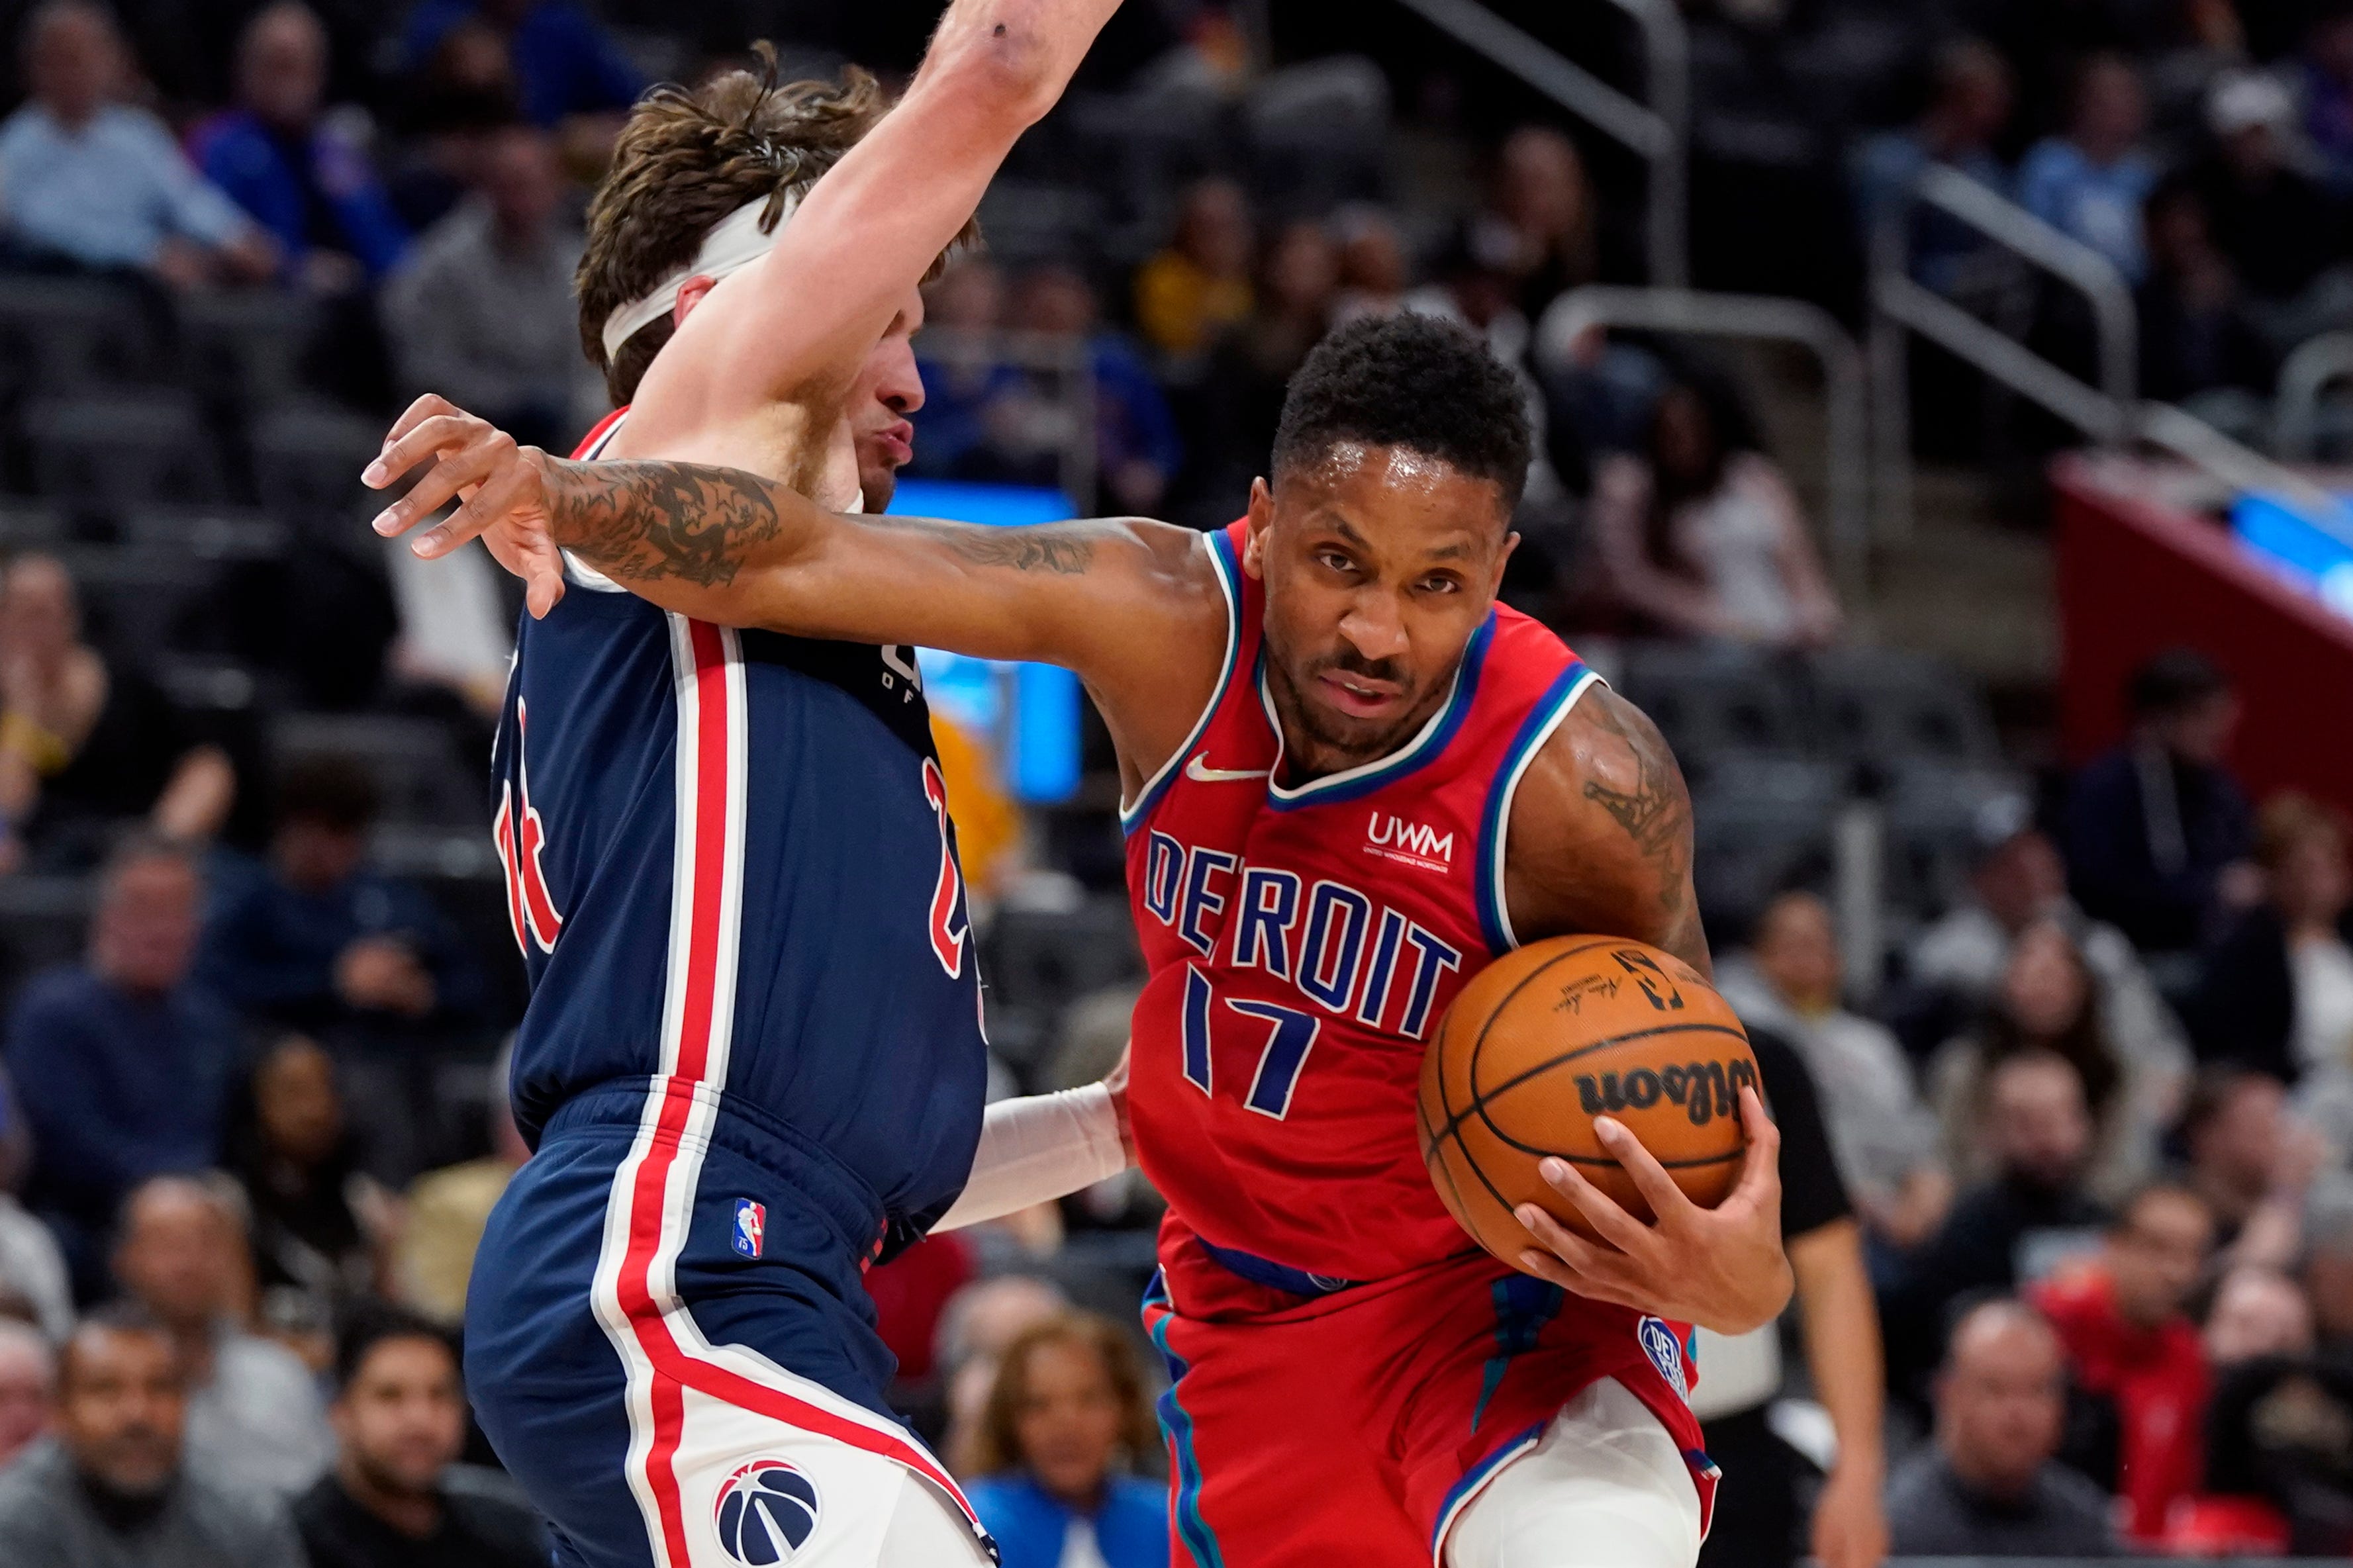 Detroit Pistons guard Rodney McGruder (17) pushes through Washington Wizards forward Corey Kispert during the first half of an NBA basketball game, Friday, March 25, 2022, in Detroit.